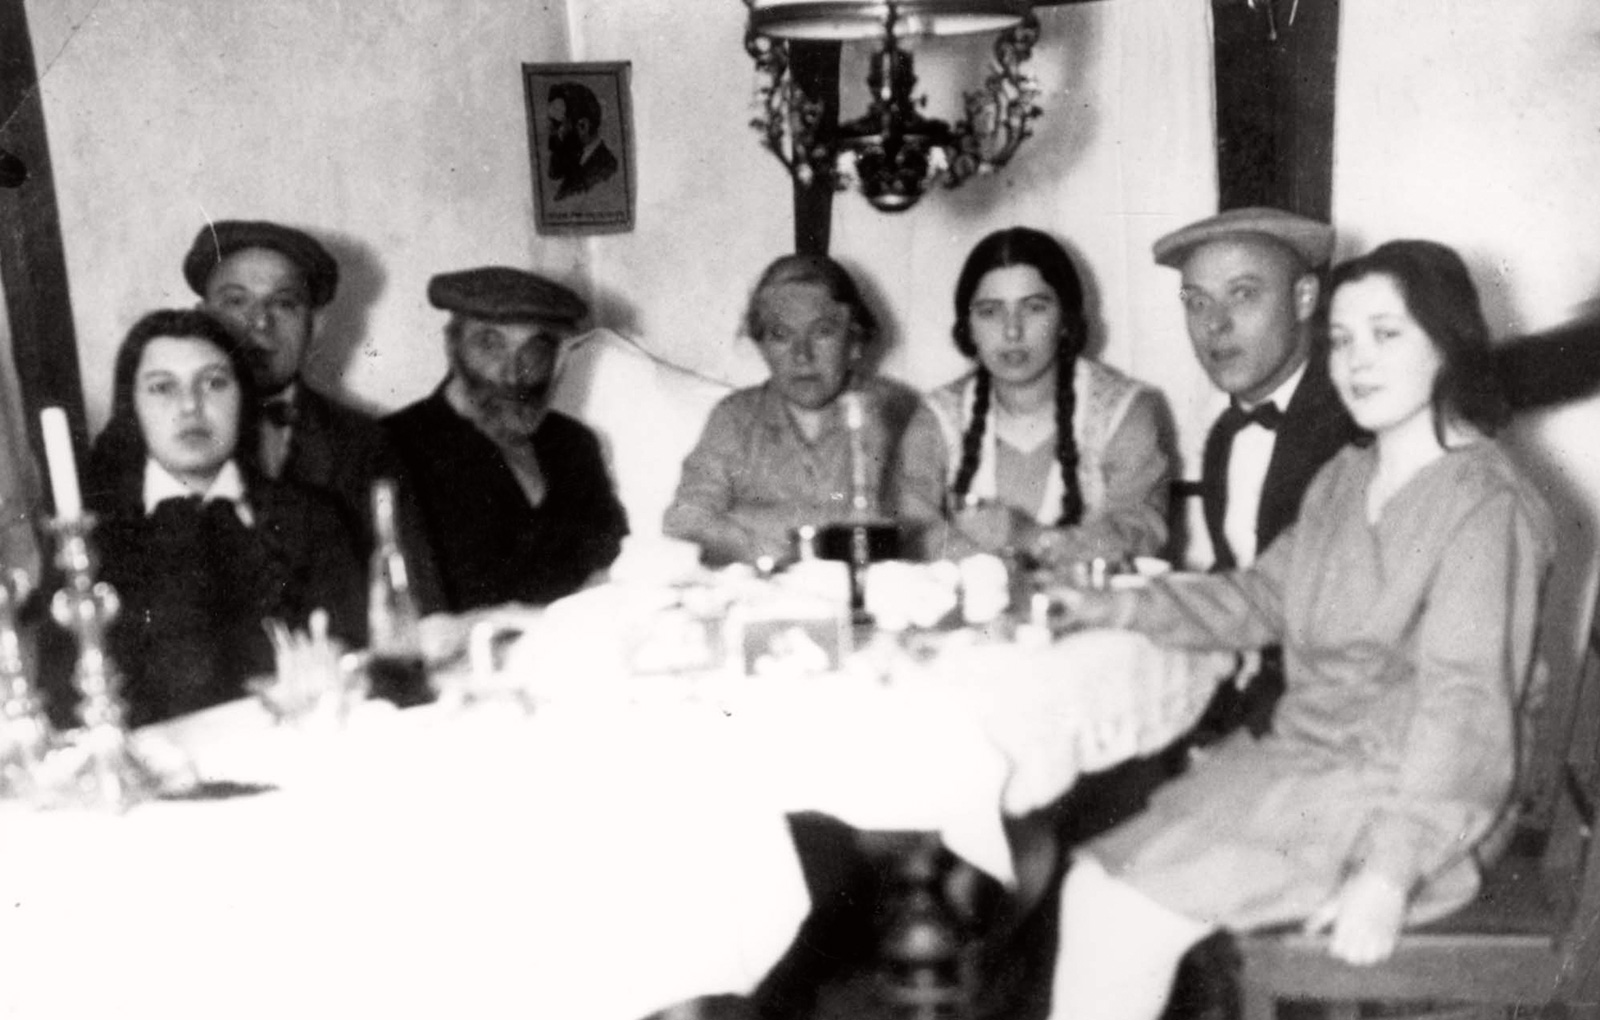 The Slep family preparing for the Passover Seder, Dusetos, Lithuania, 1931